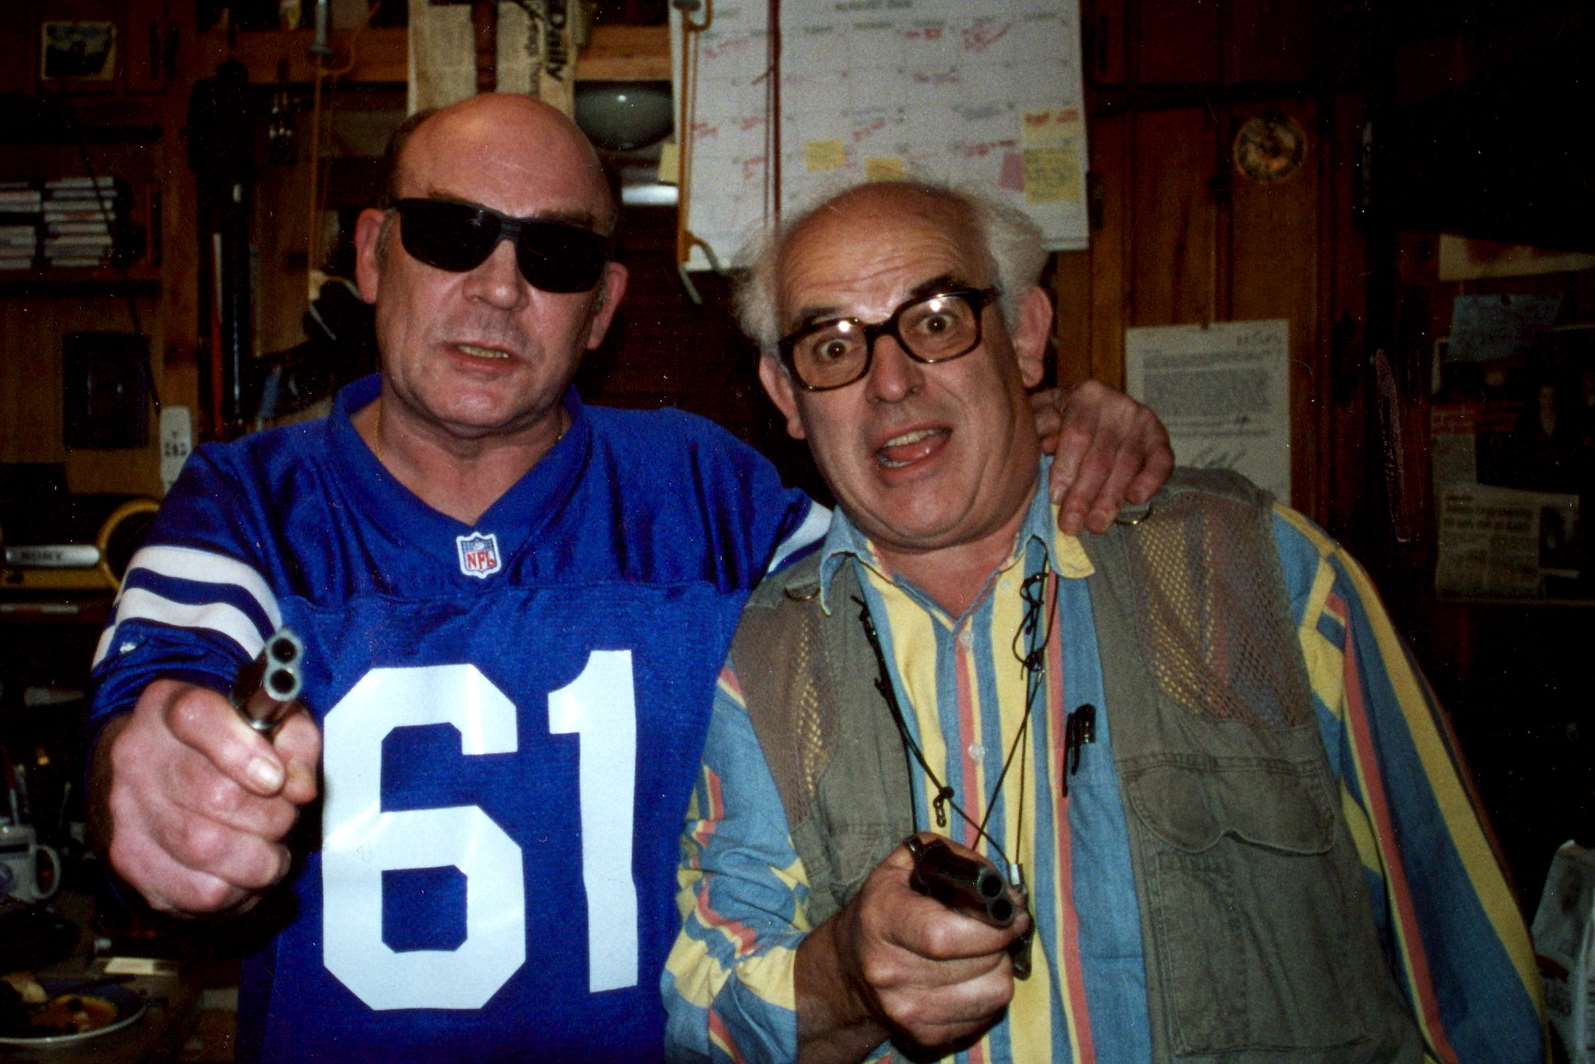 Illustrator Ralph Steadman, right, with Hunter S Thompson, author of Fear and Loathing in Las Vegas